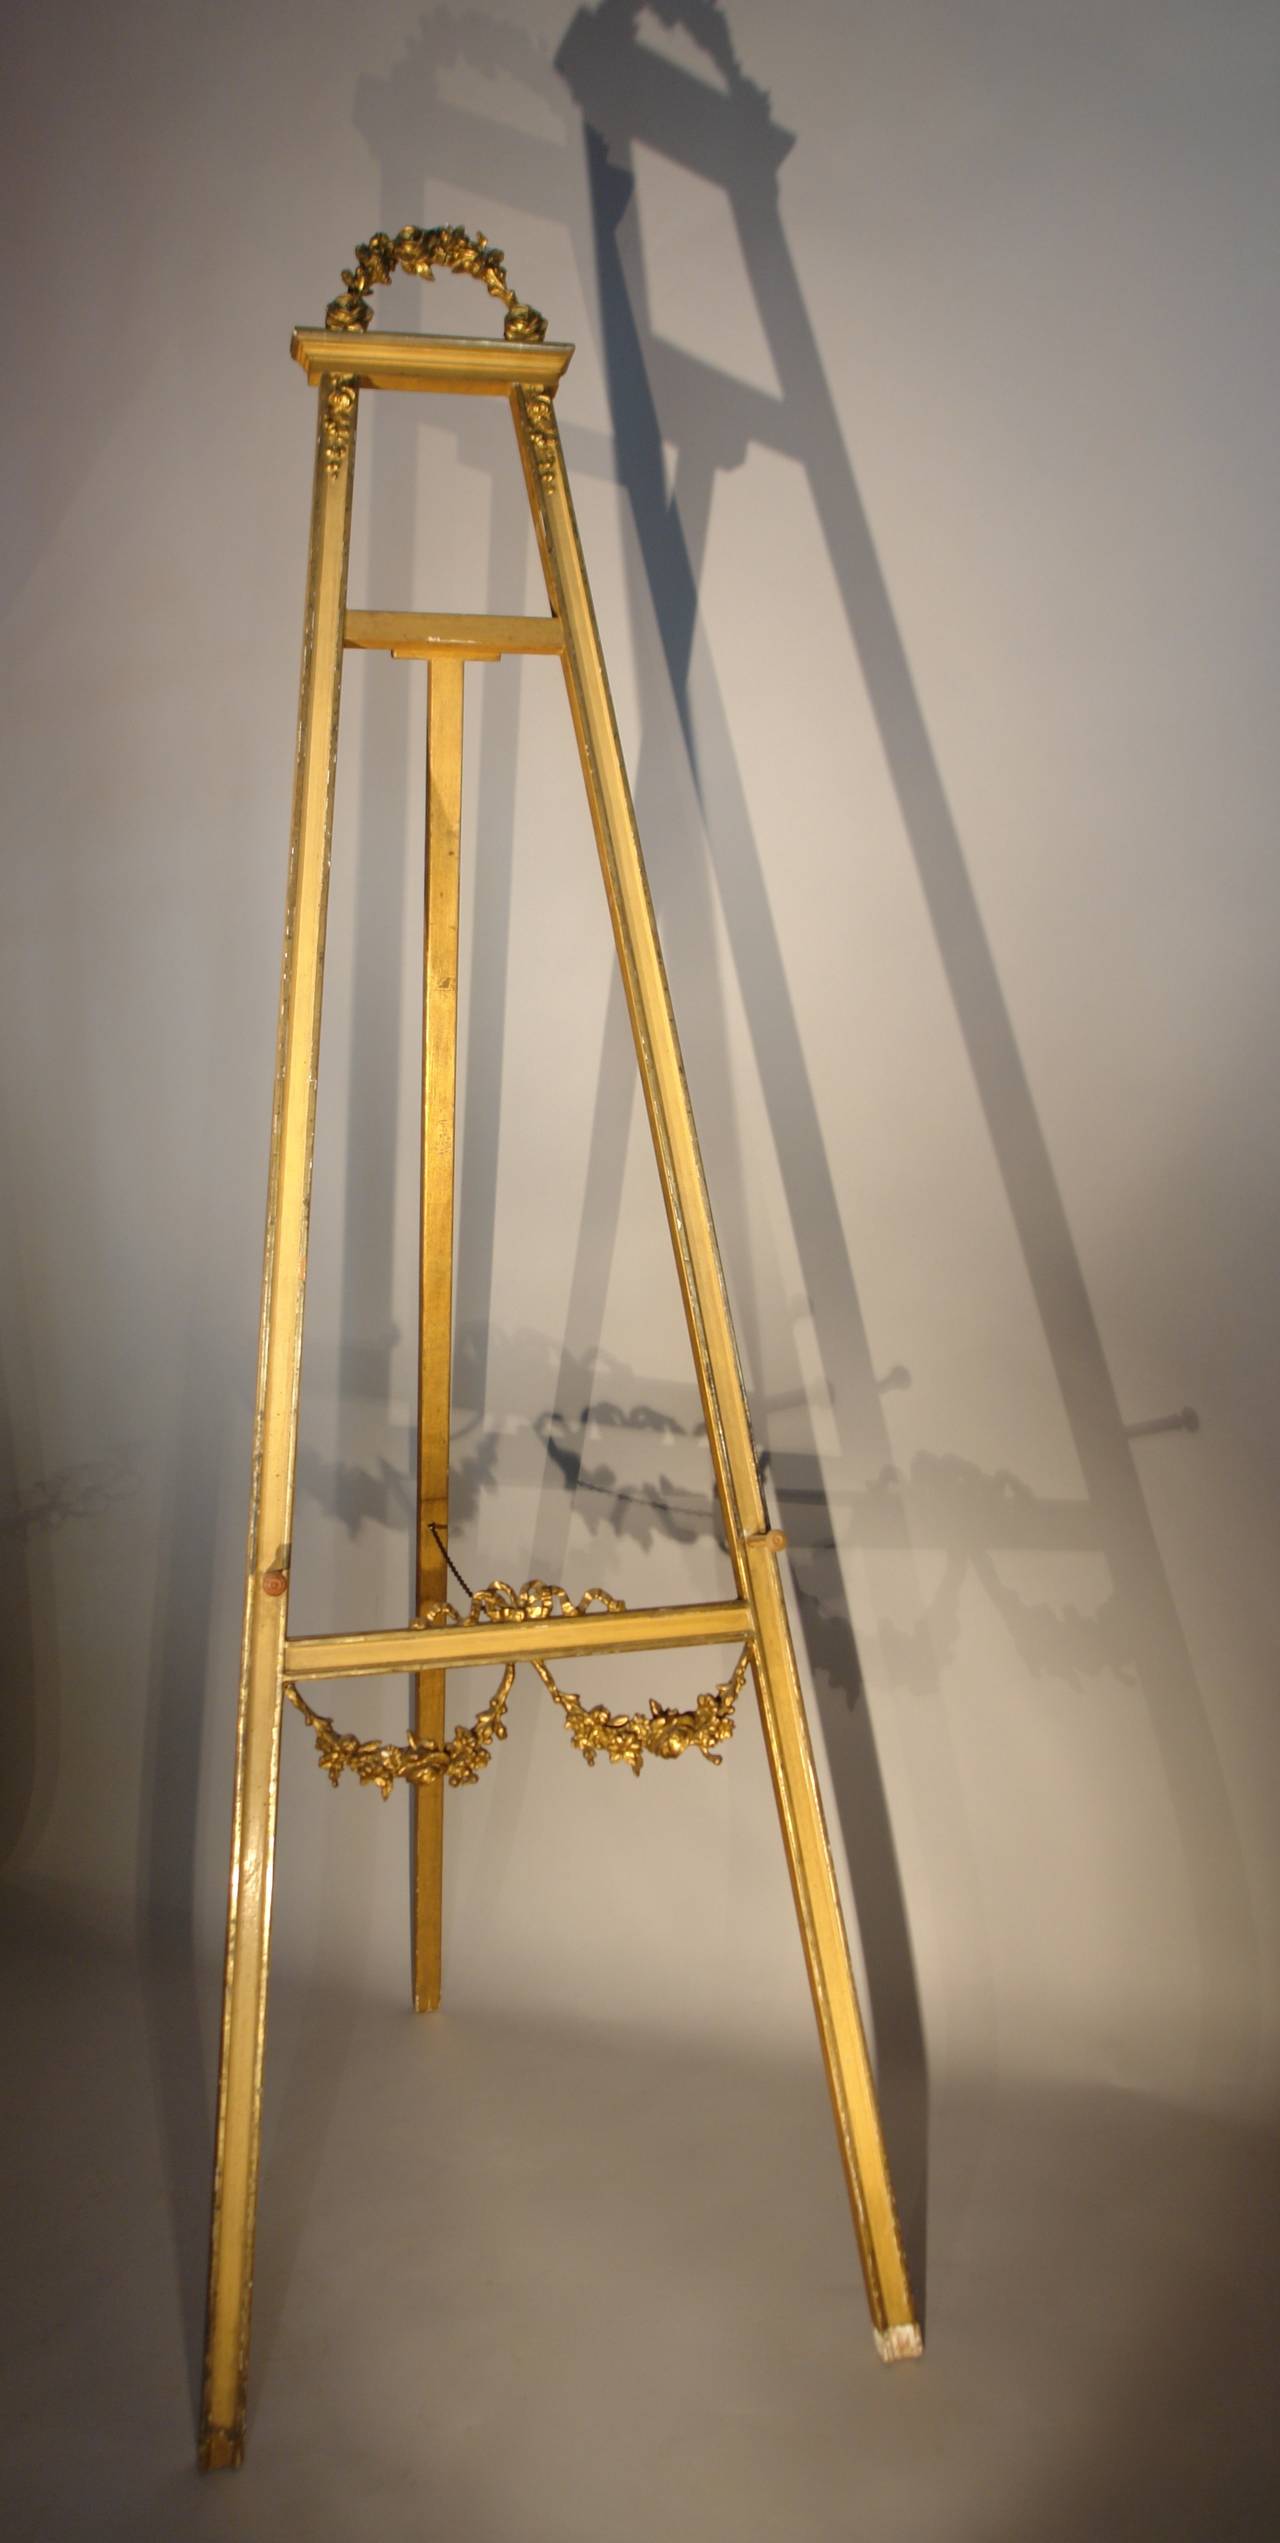 19th century French display easel retaining the original gilding and paint.
Folds flat for transport or storage.